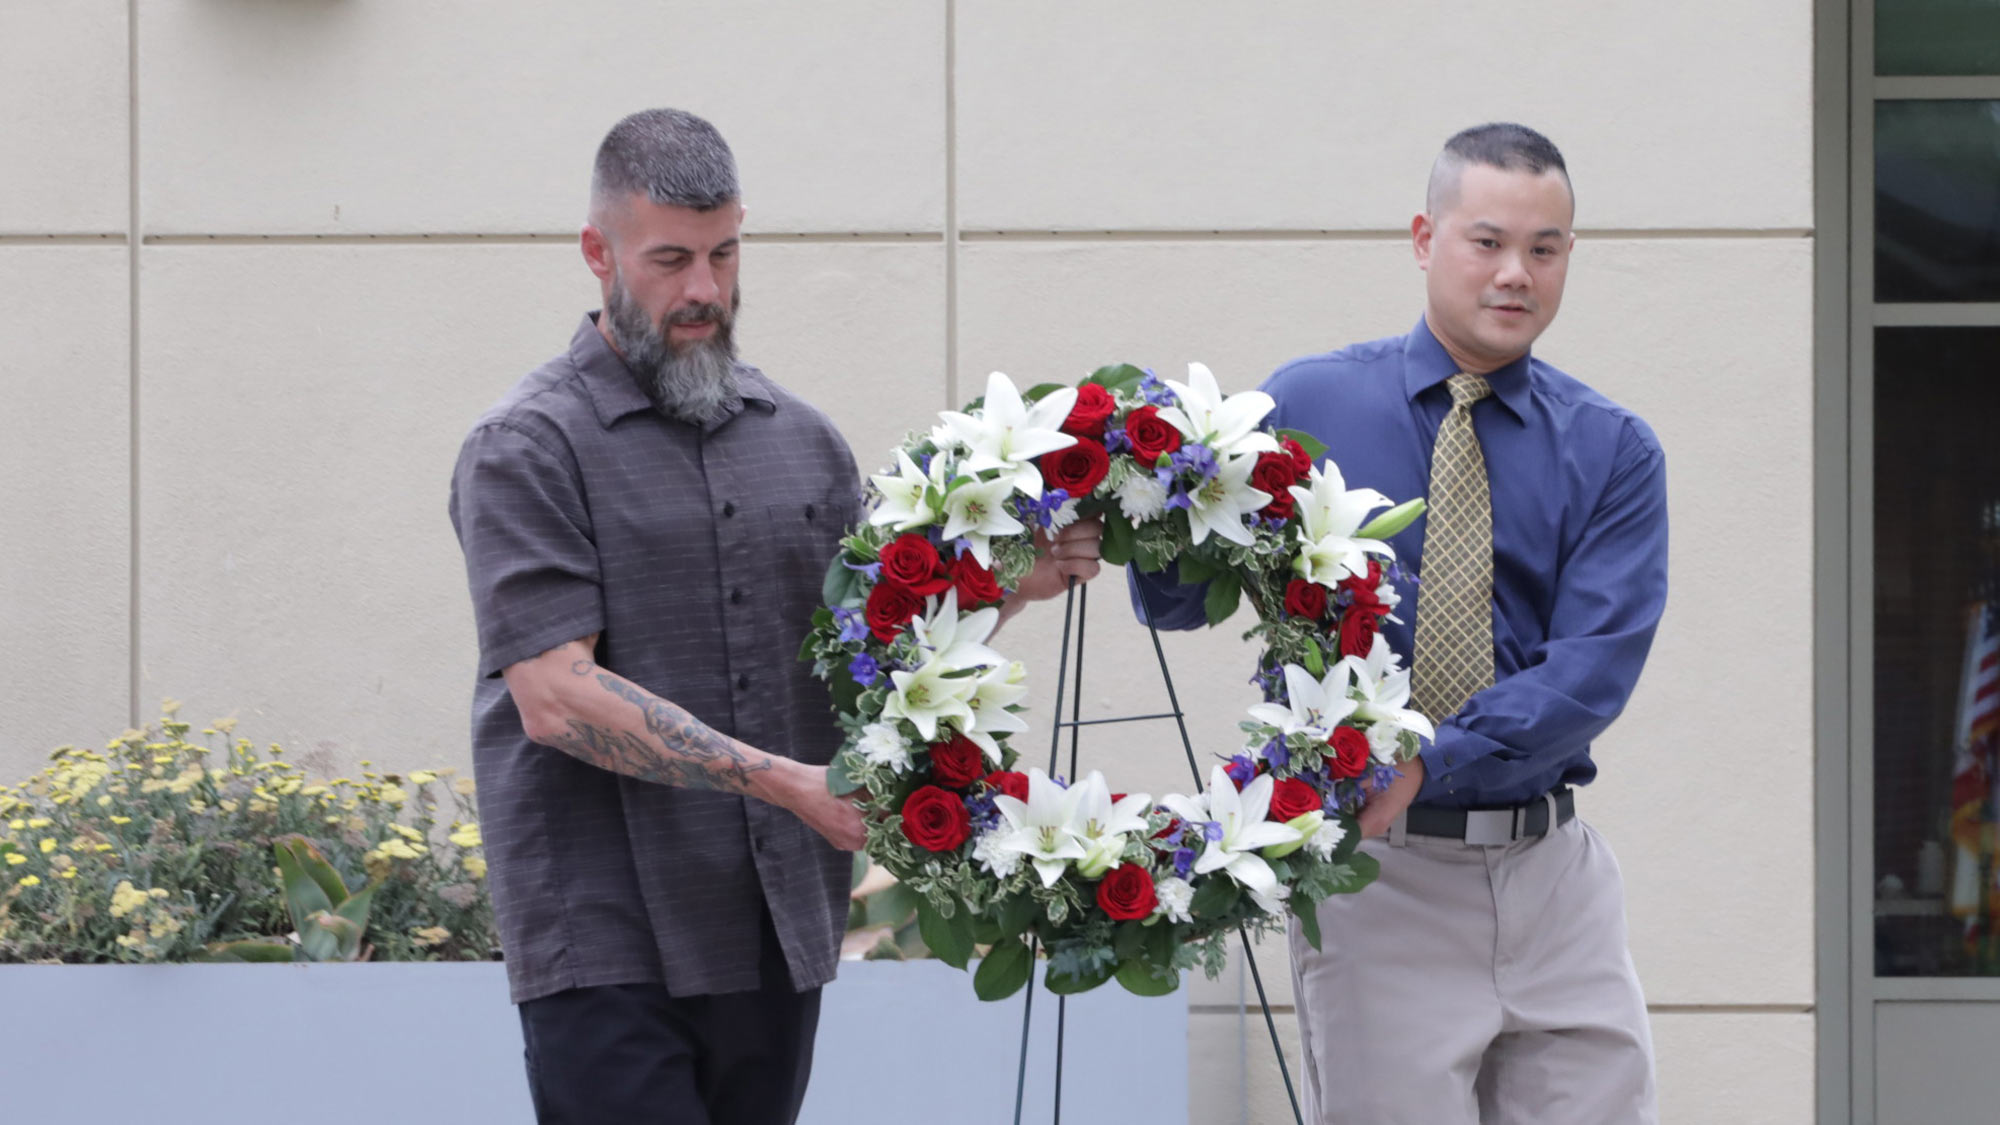 Two men carry red, white and blue wreath